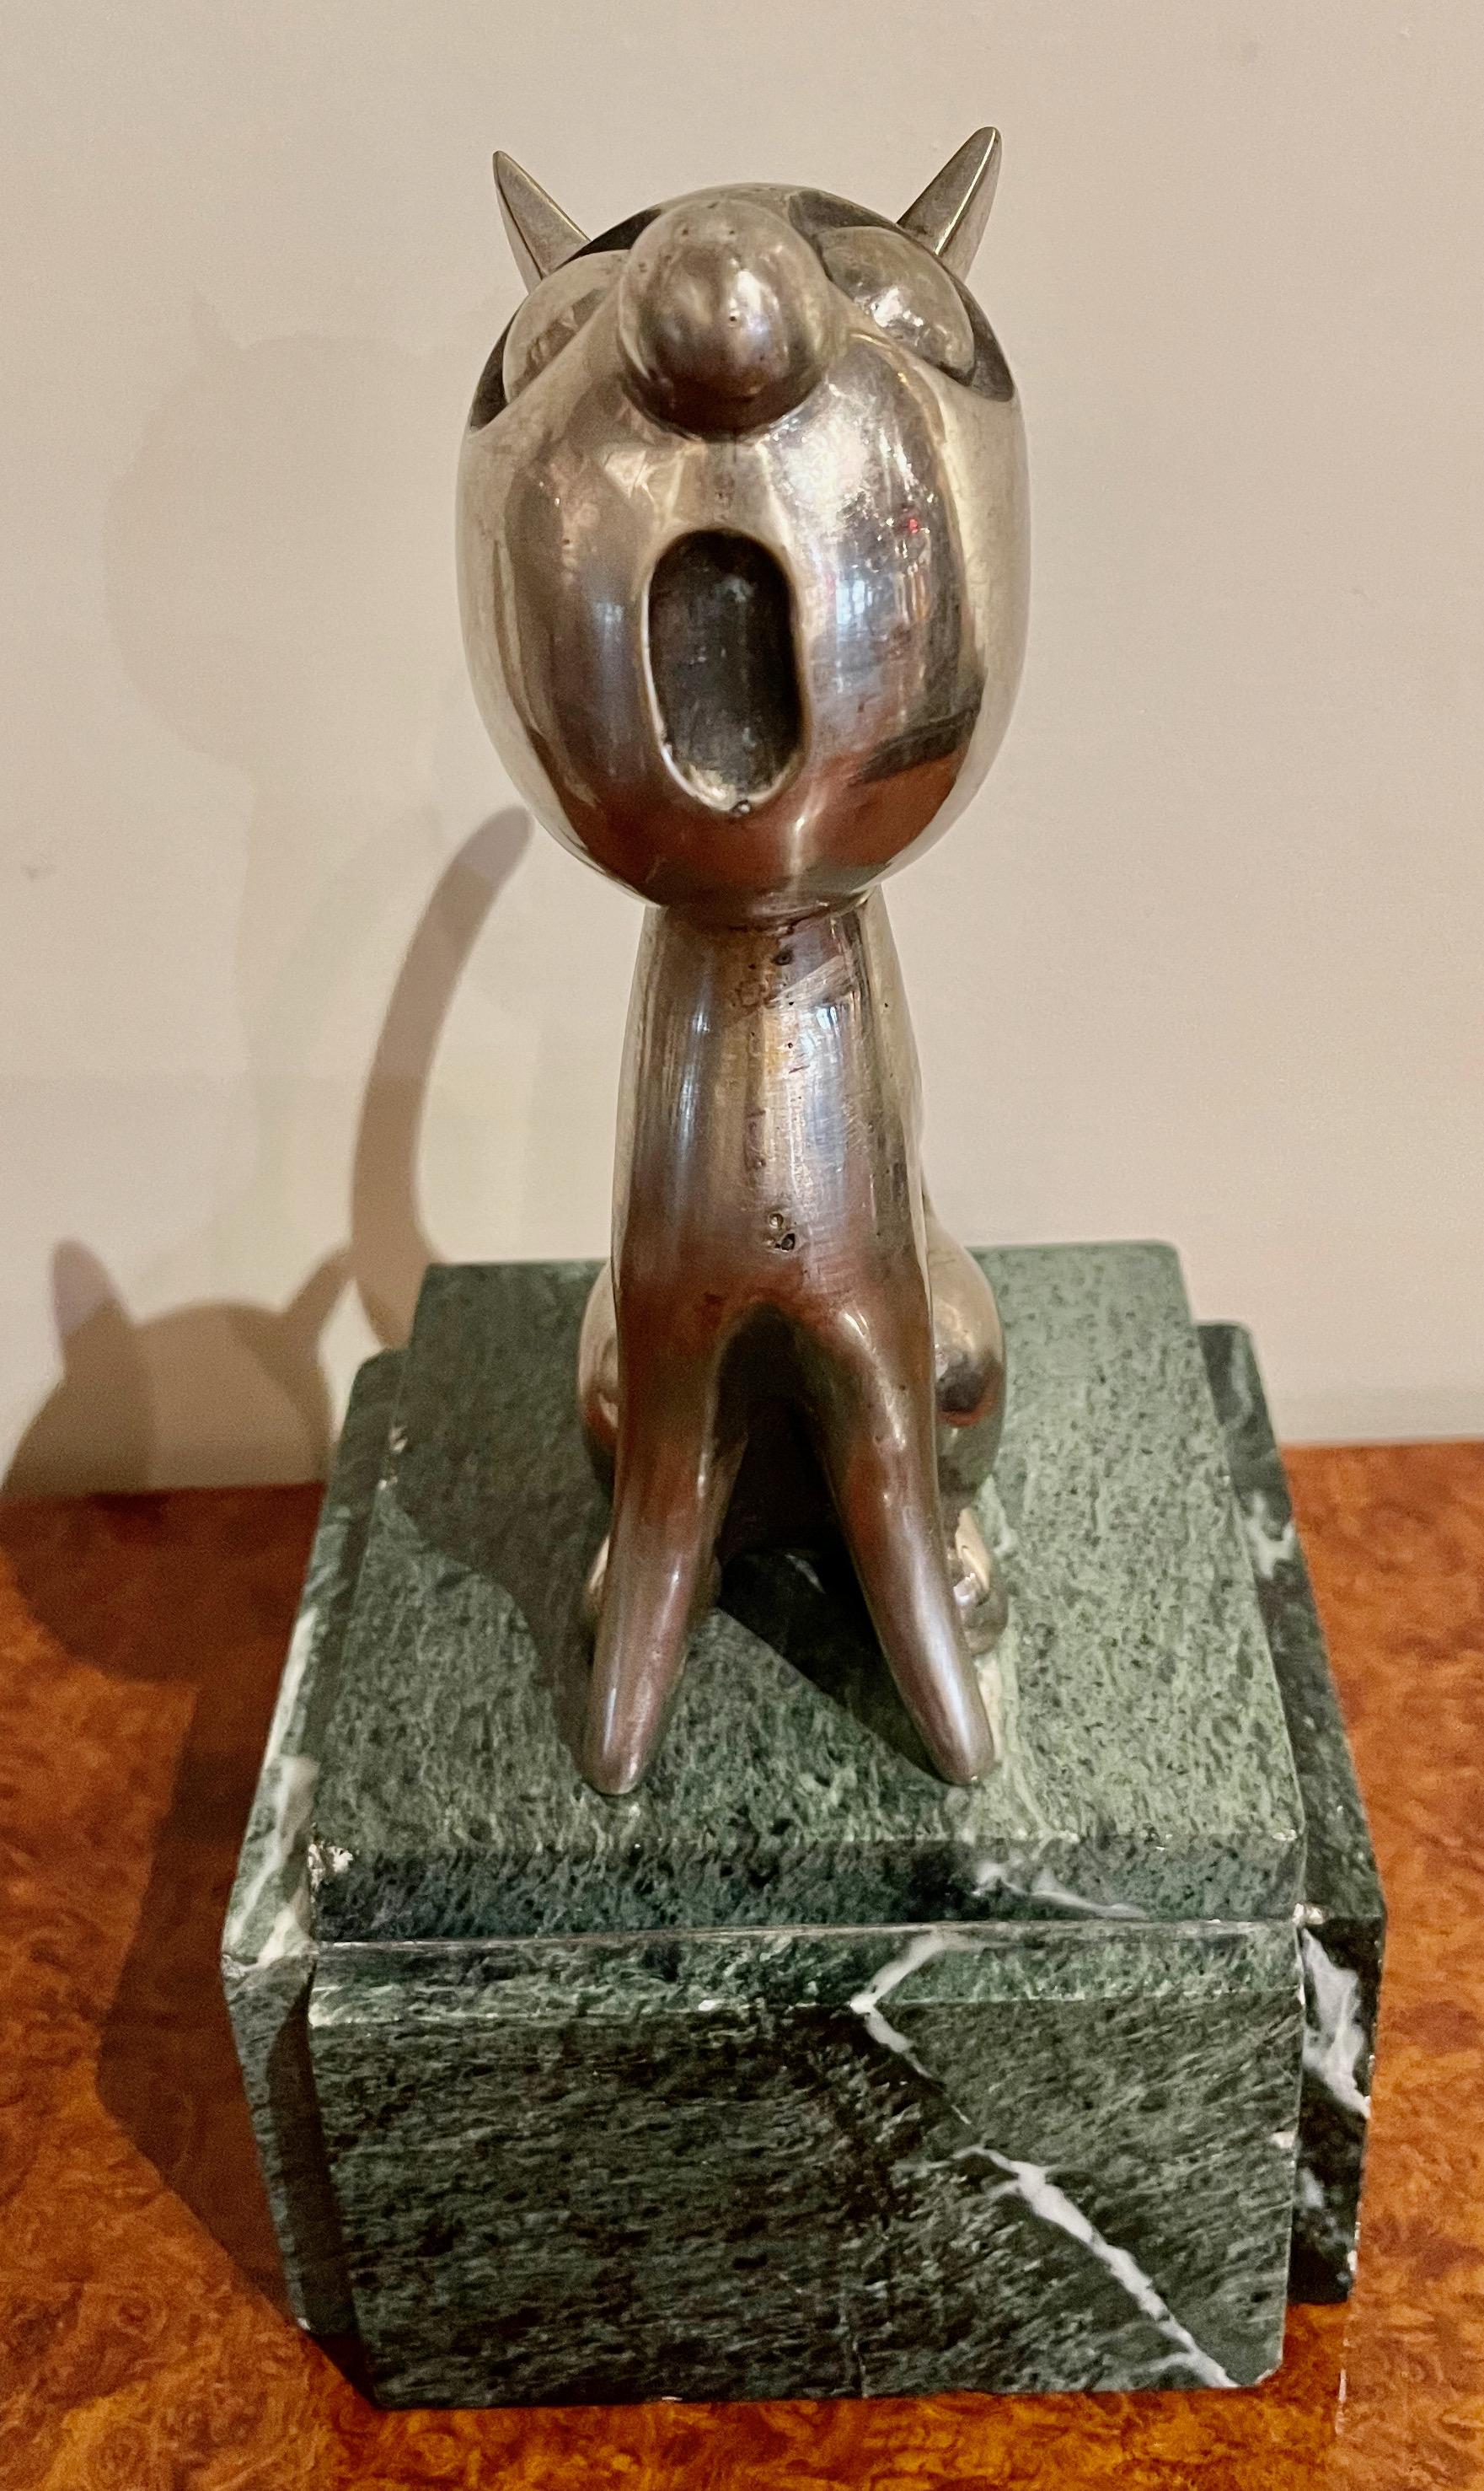 Art Deco bronze of a cat in a caricature rendering stretching with a round mouth and big eyes. Well-known French sculptor Andre Vincent Becquerel French circa 1930. Also known for car mascots and this may have originally been designed for that. This